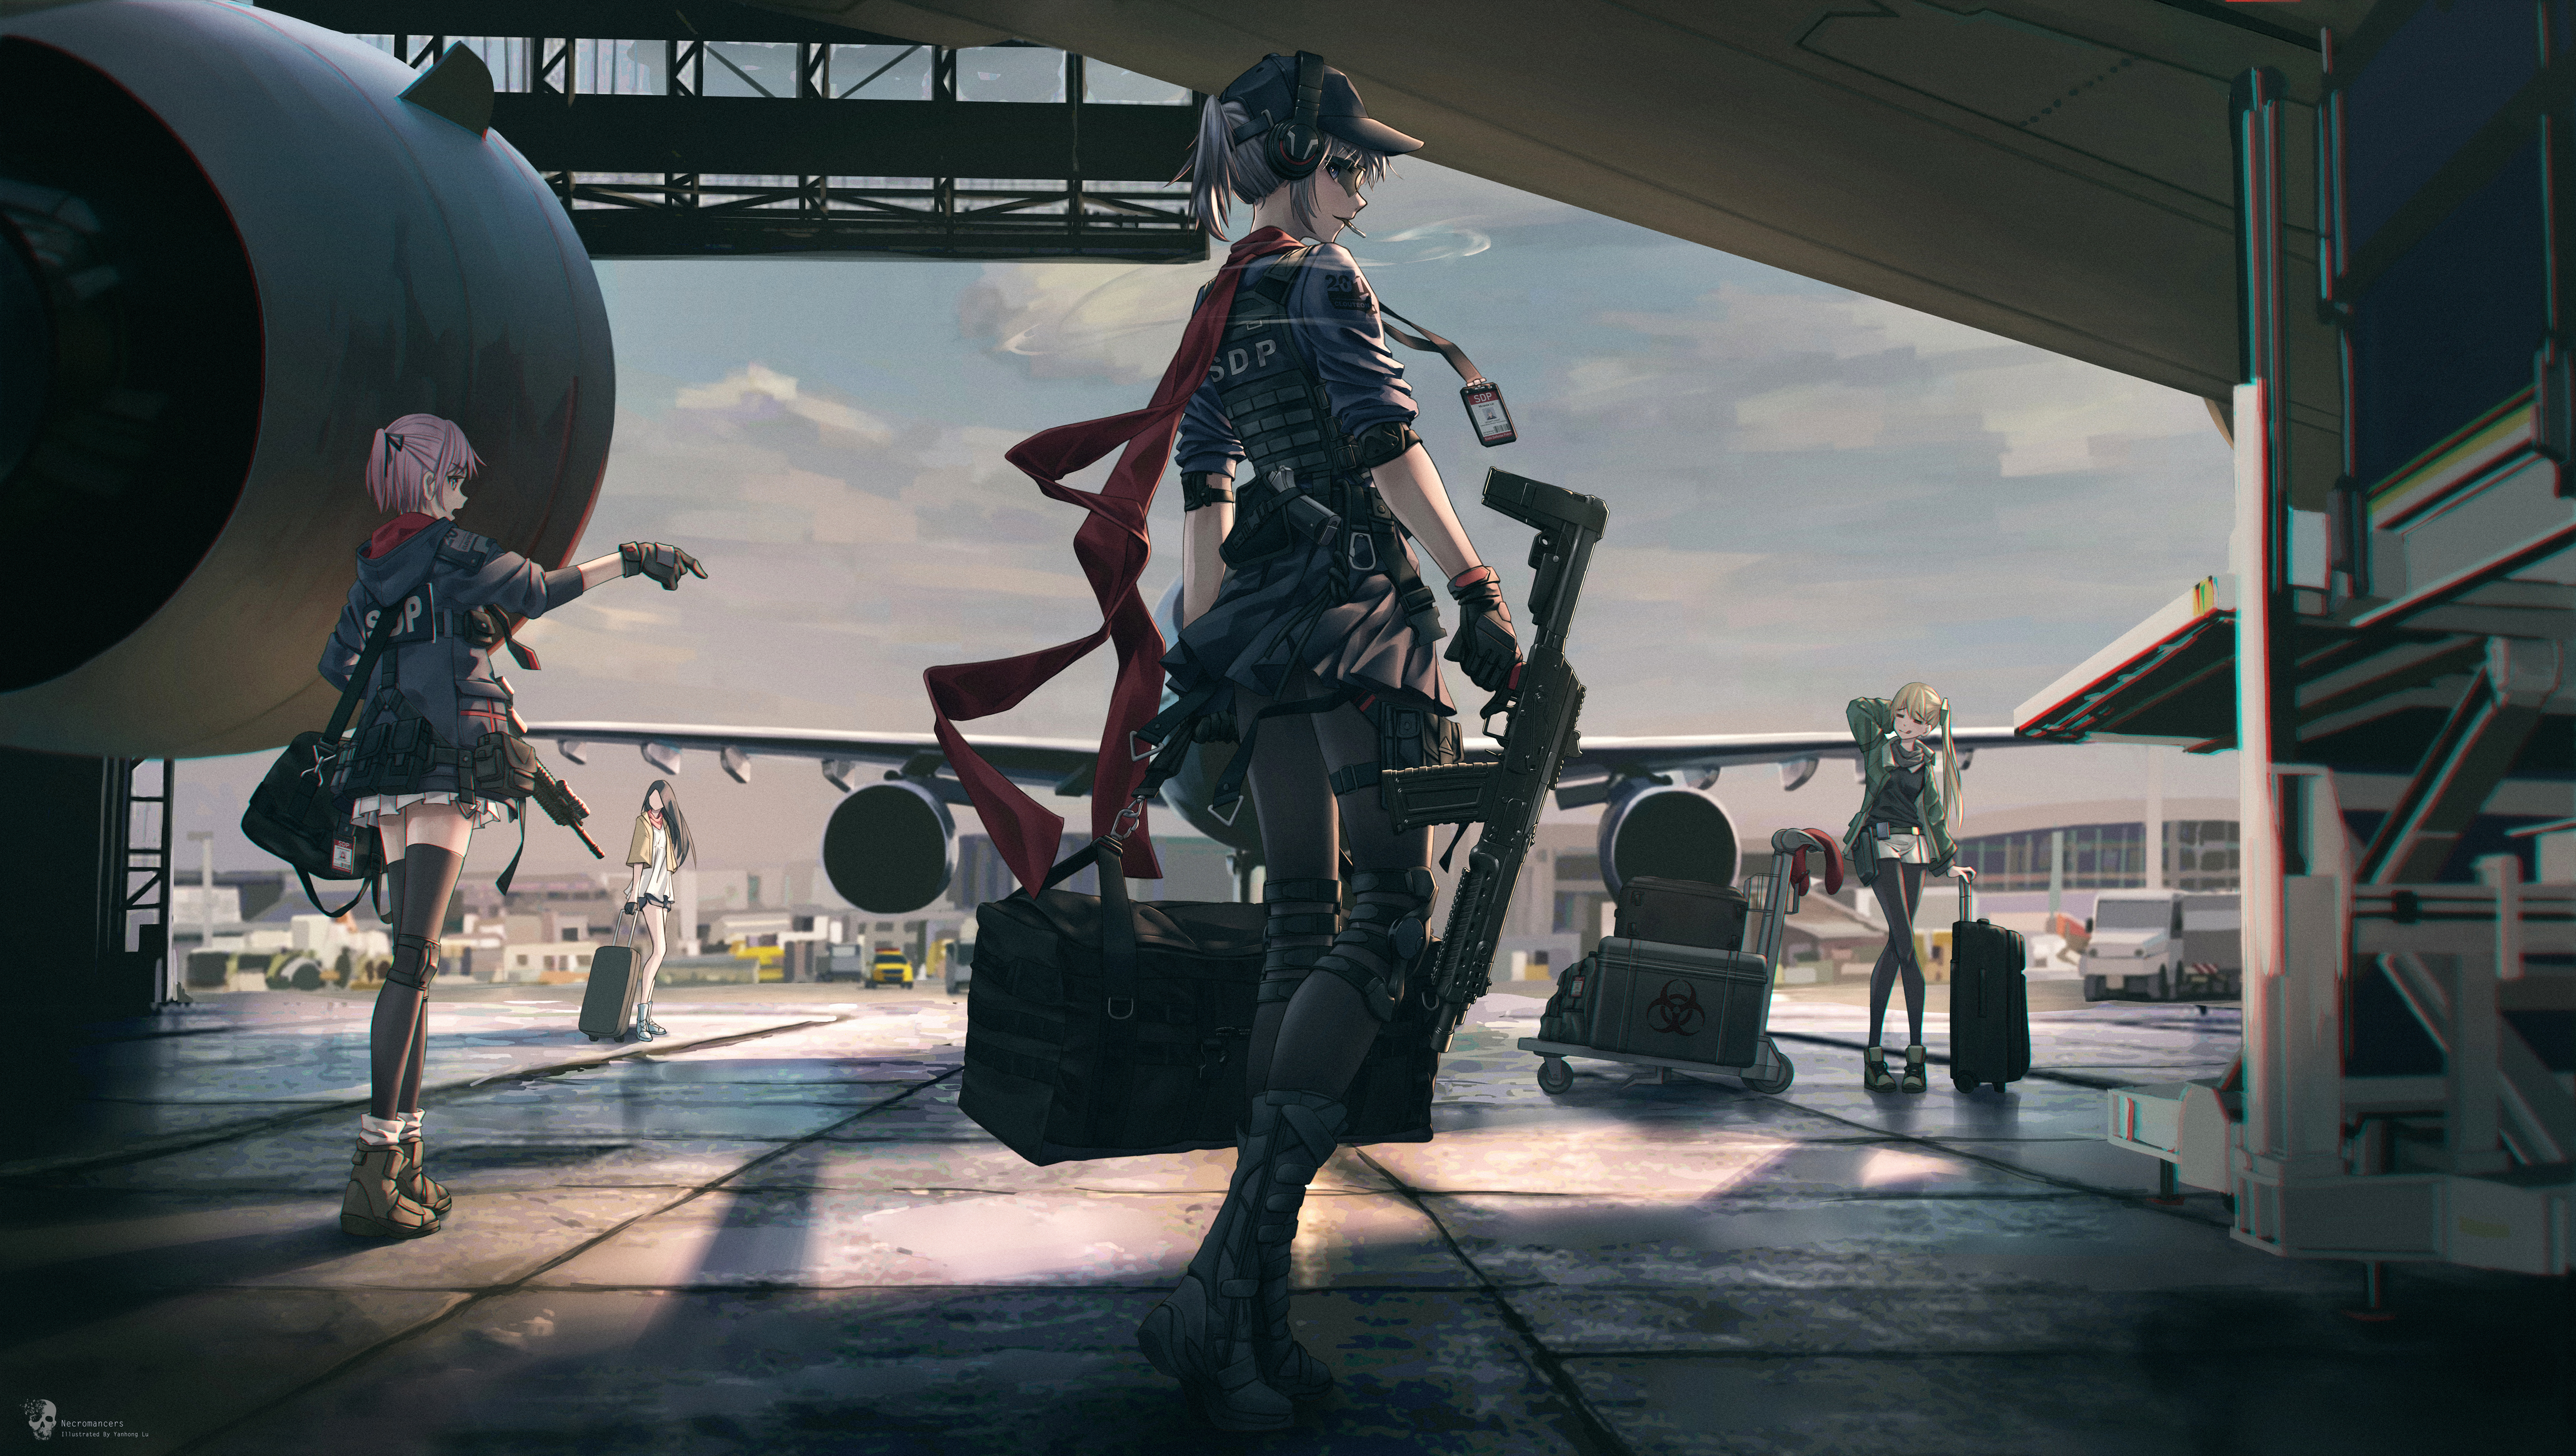 Mobile wallpaper: Anime, Sunset, Airport, 1004622 download the picture for  free.